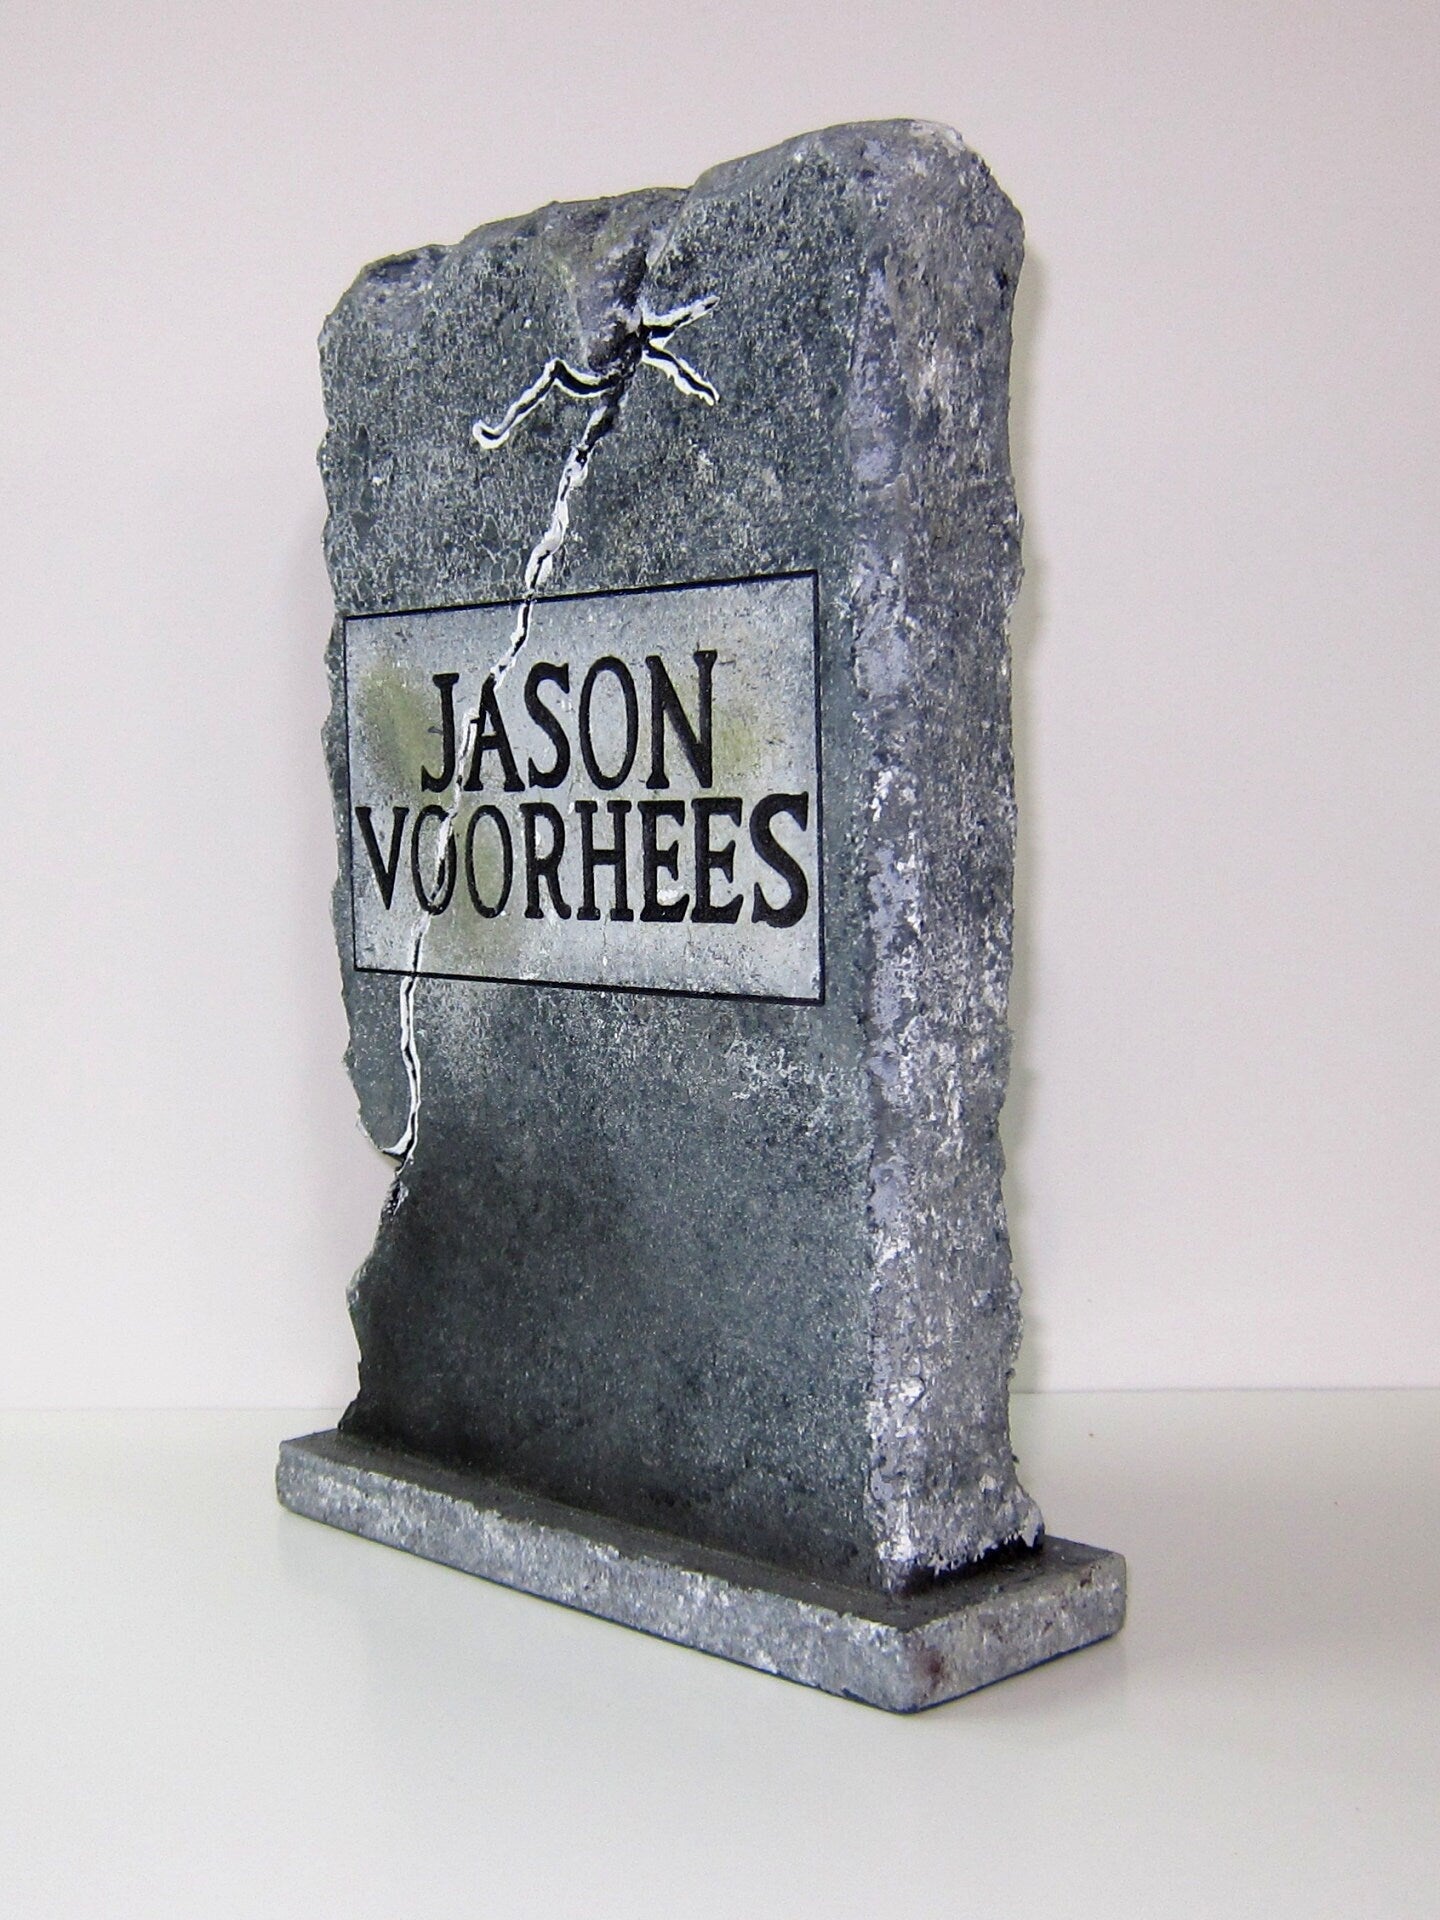 Jason Voorhees Friday The 13th Part 6 Mini Tombstone Prop